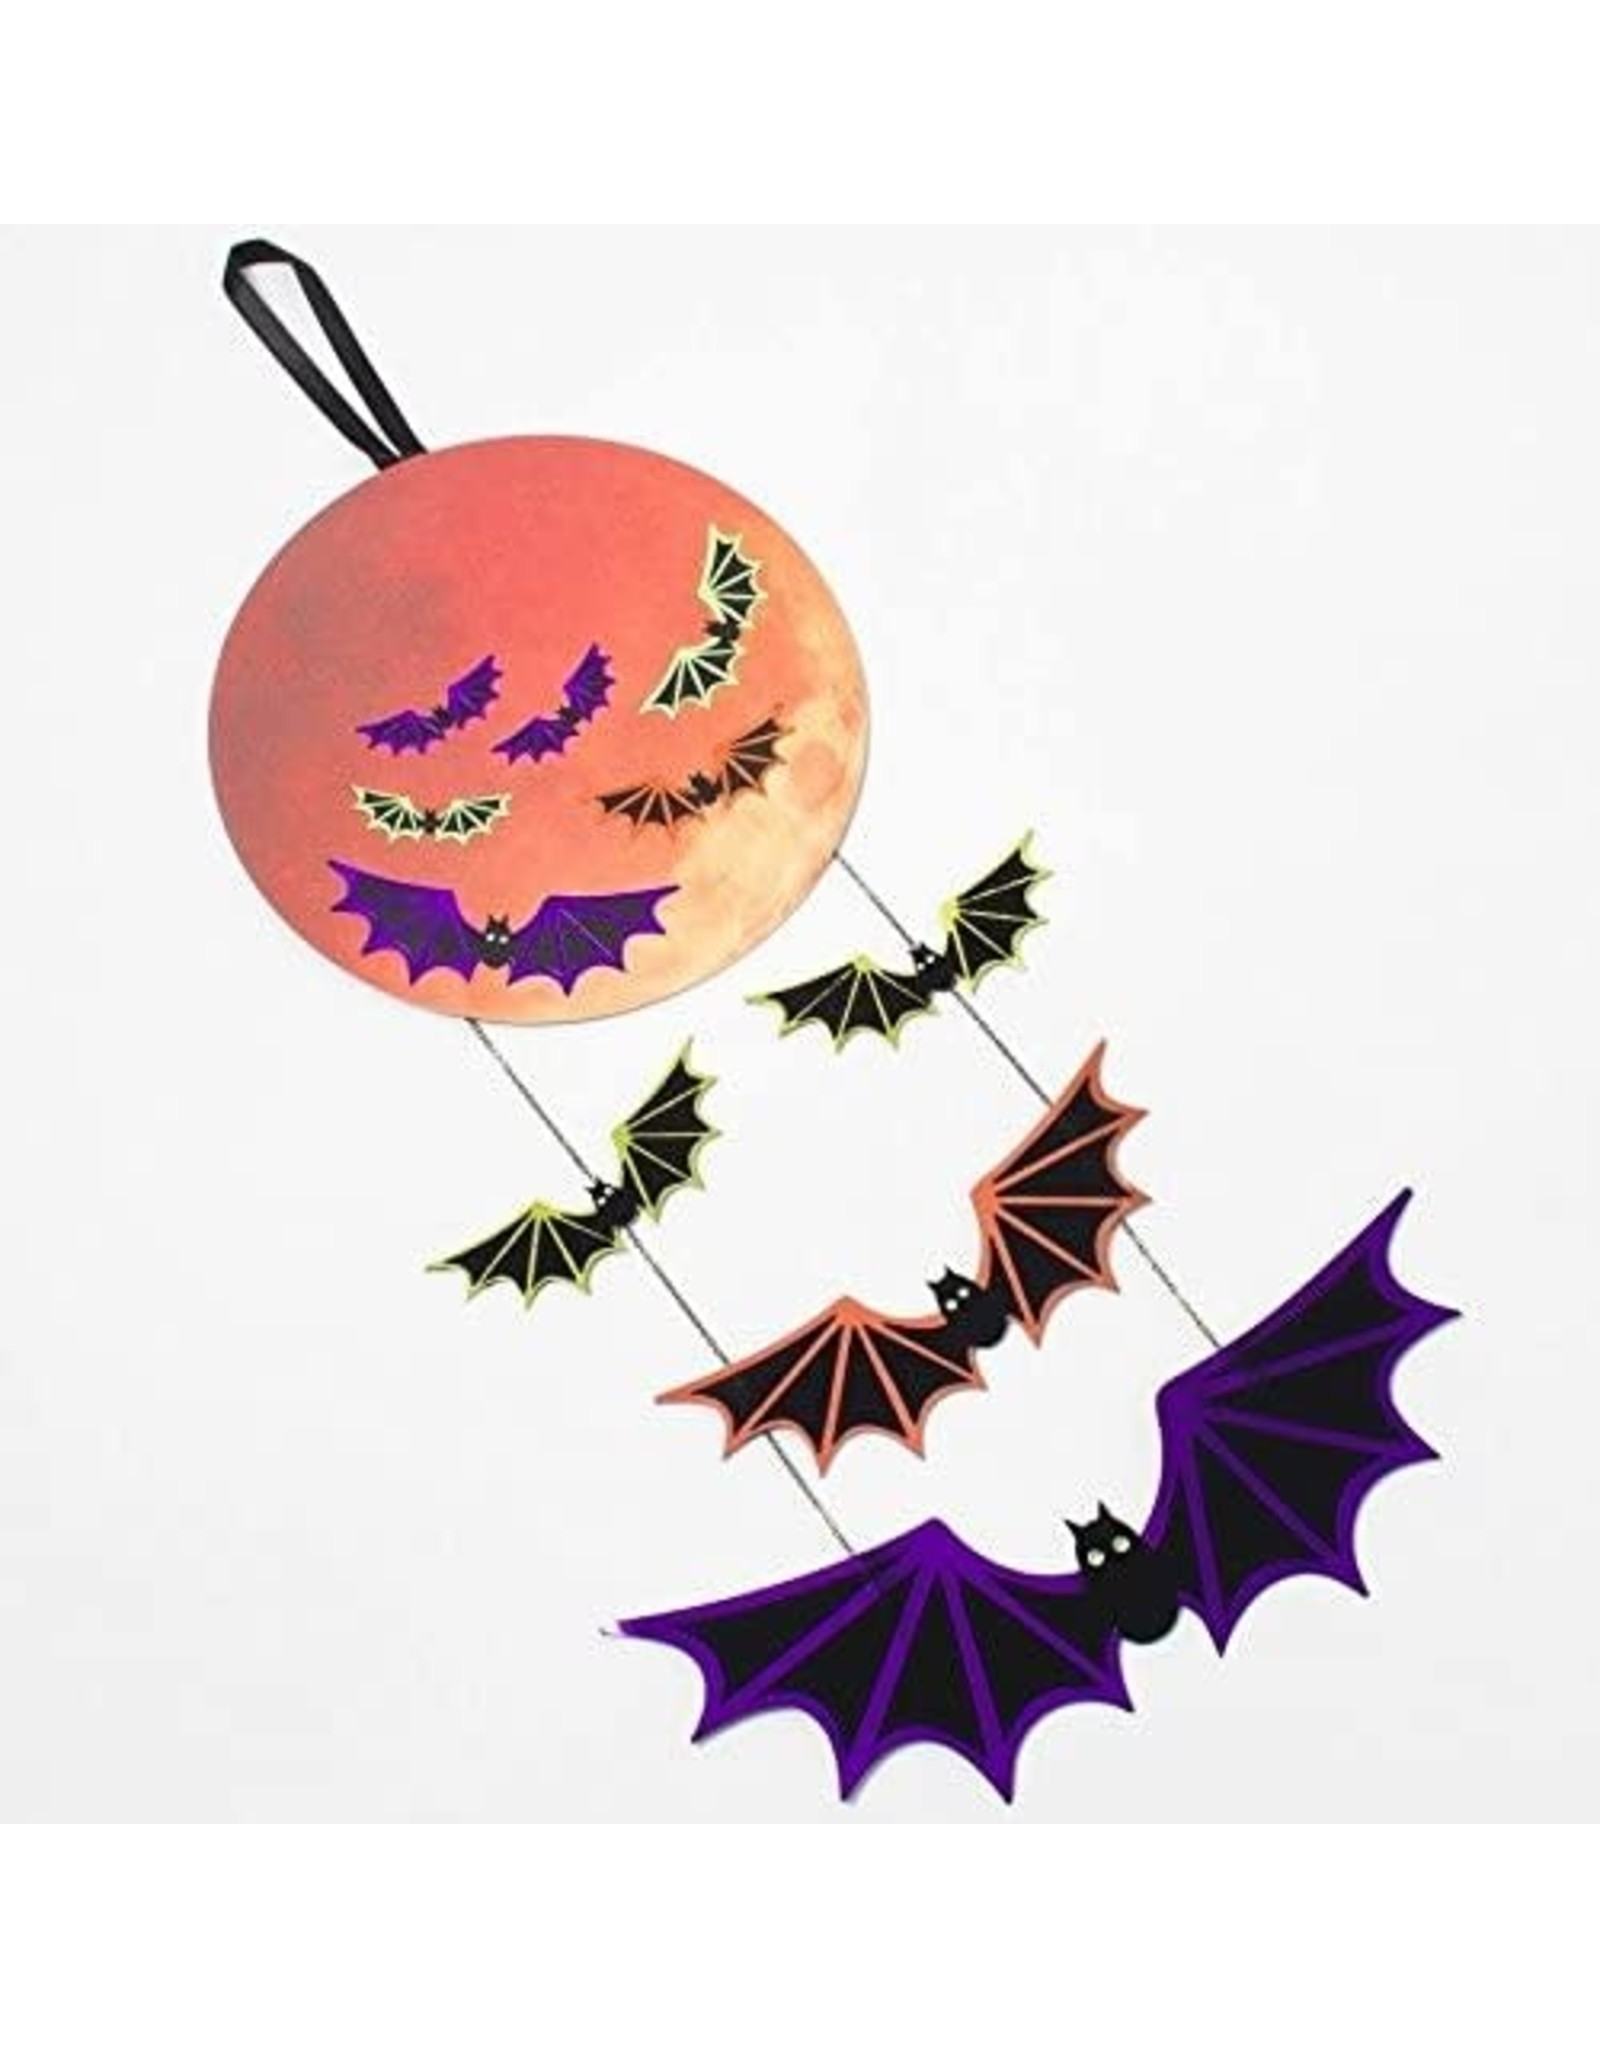 PAPYRUS® Halloween Card Harvest Moon And Bats Decorative Mobile